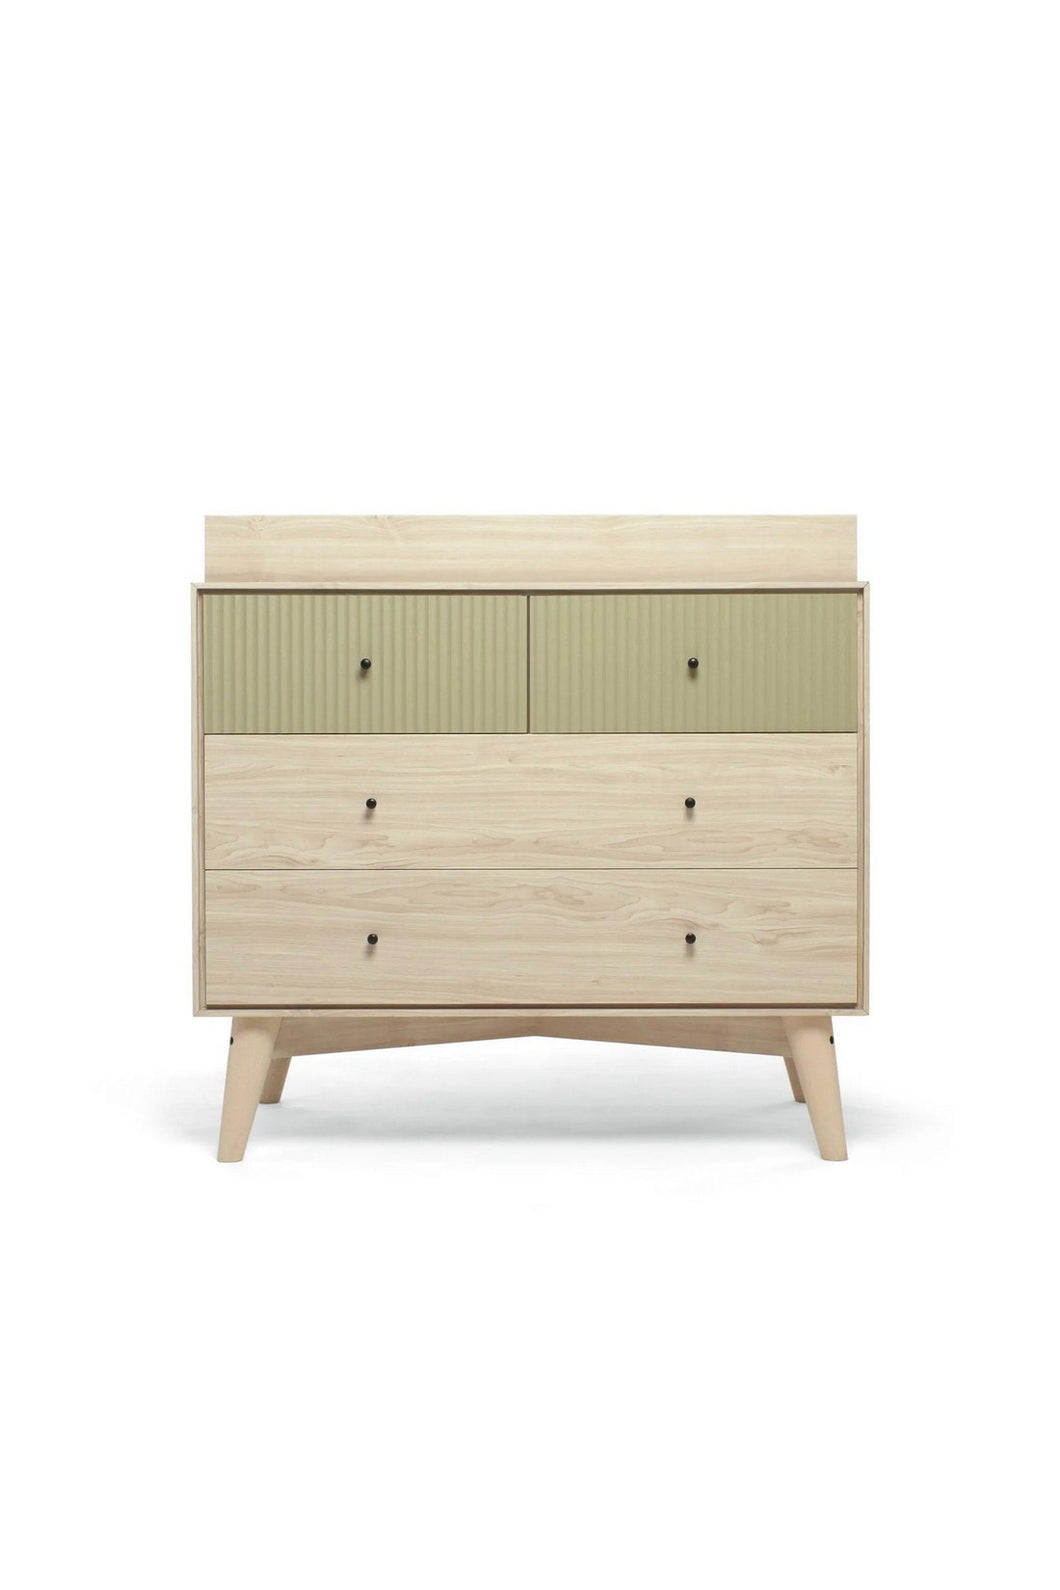 Mamas & Papas Coxley Nusery Dresser Changer Olive Green 8